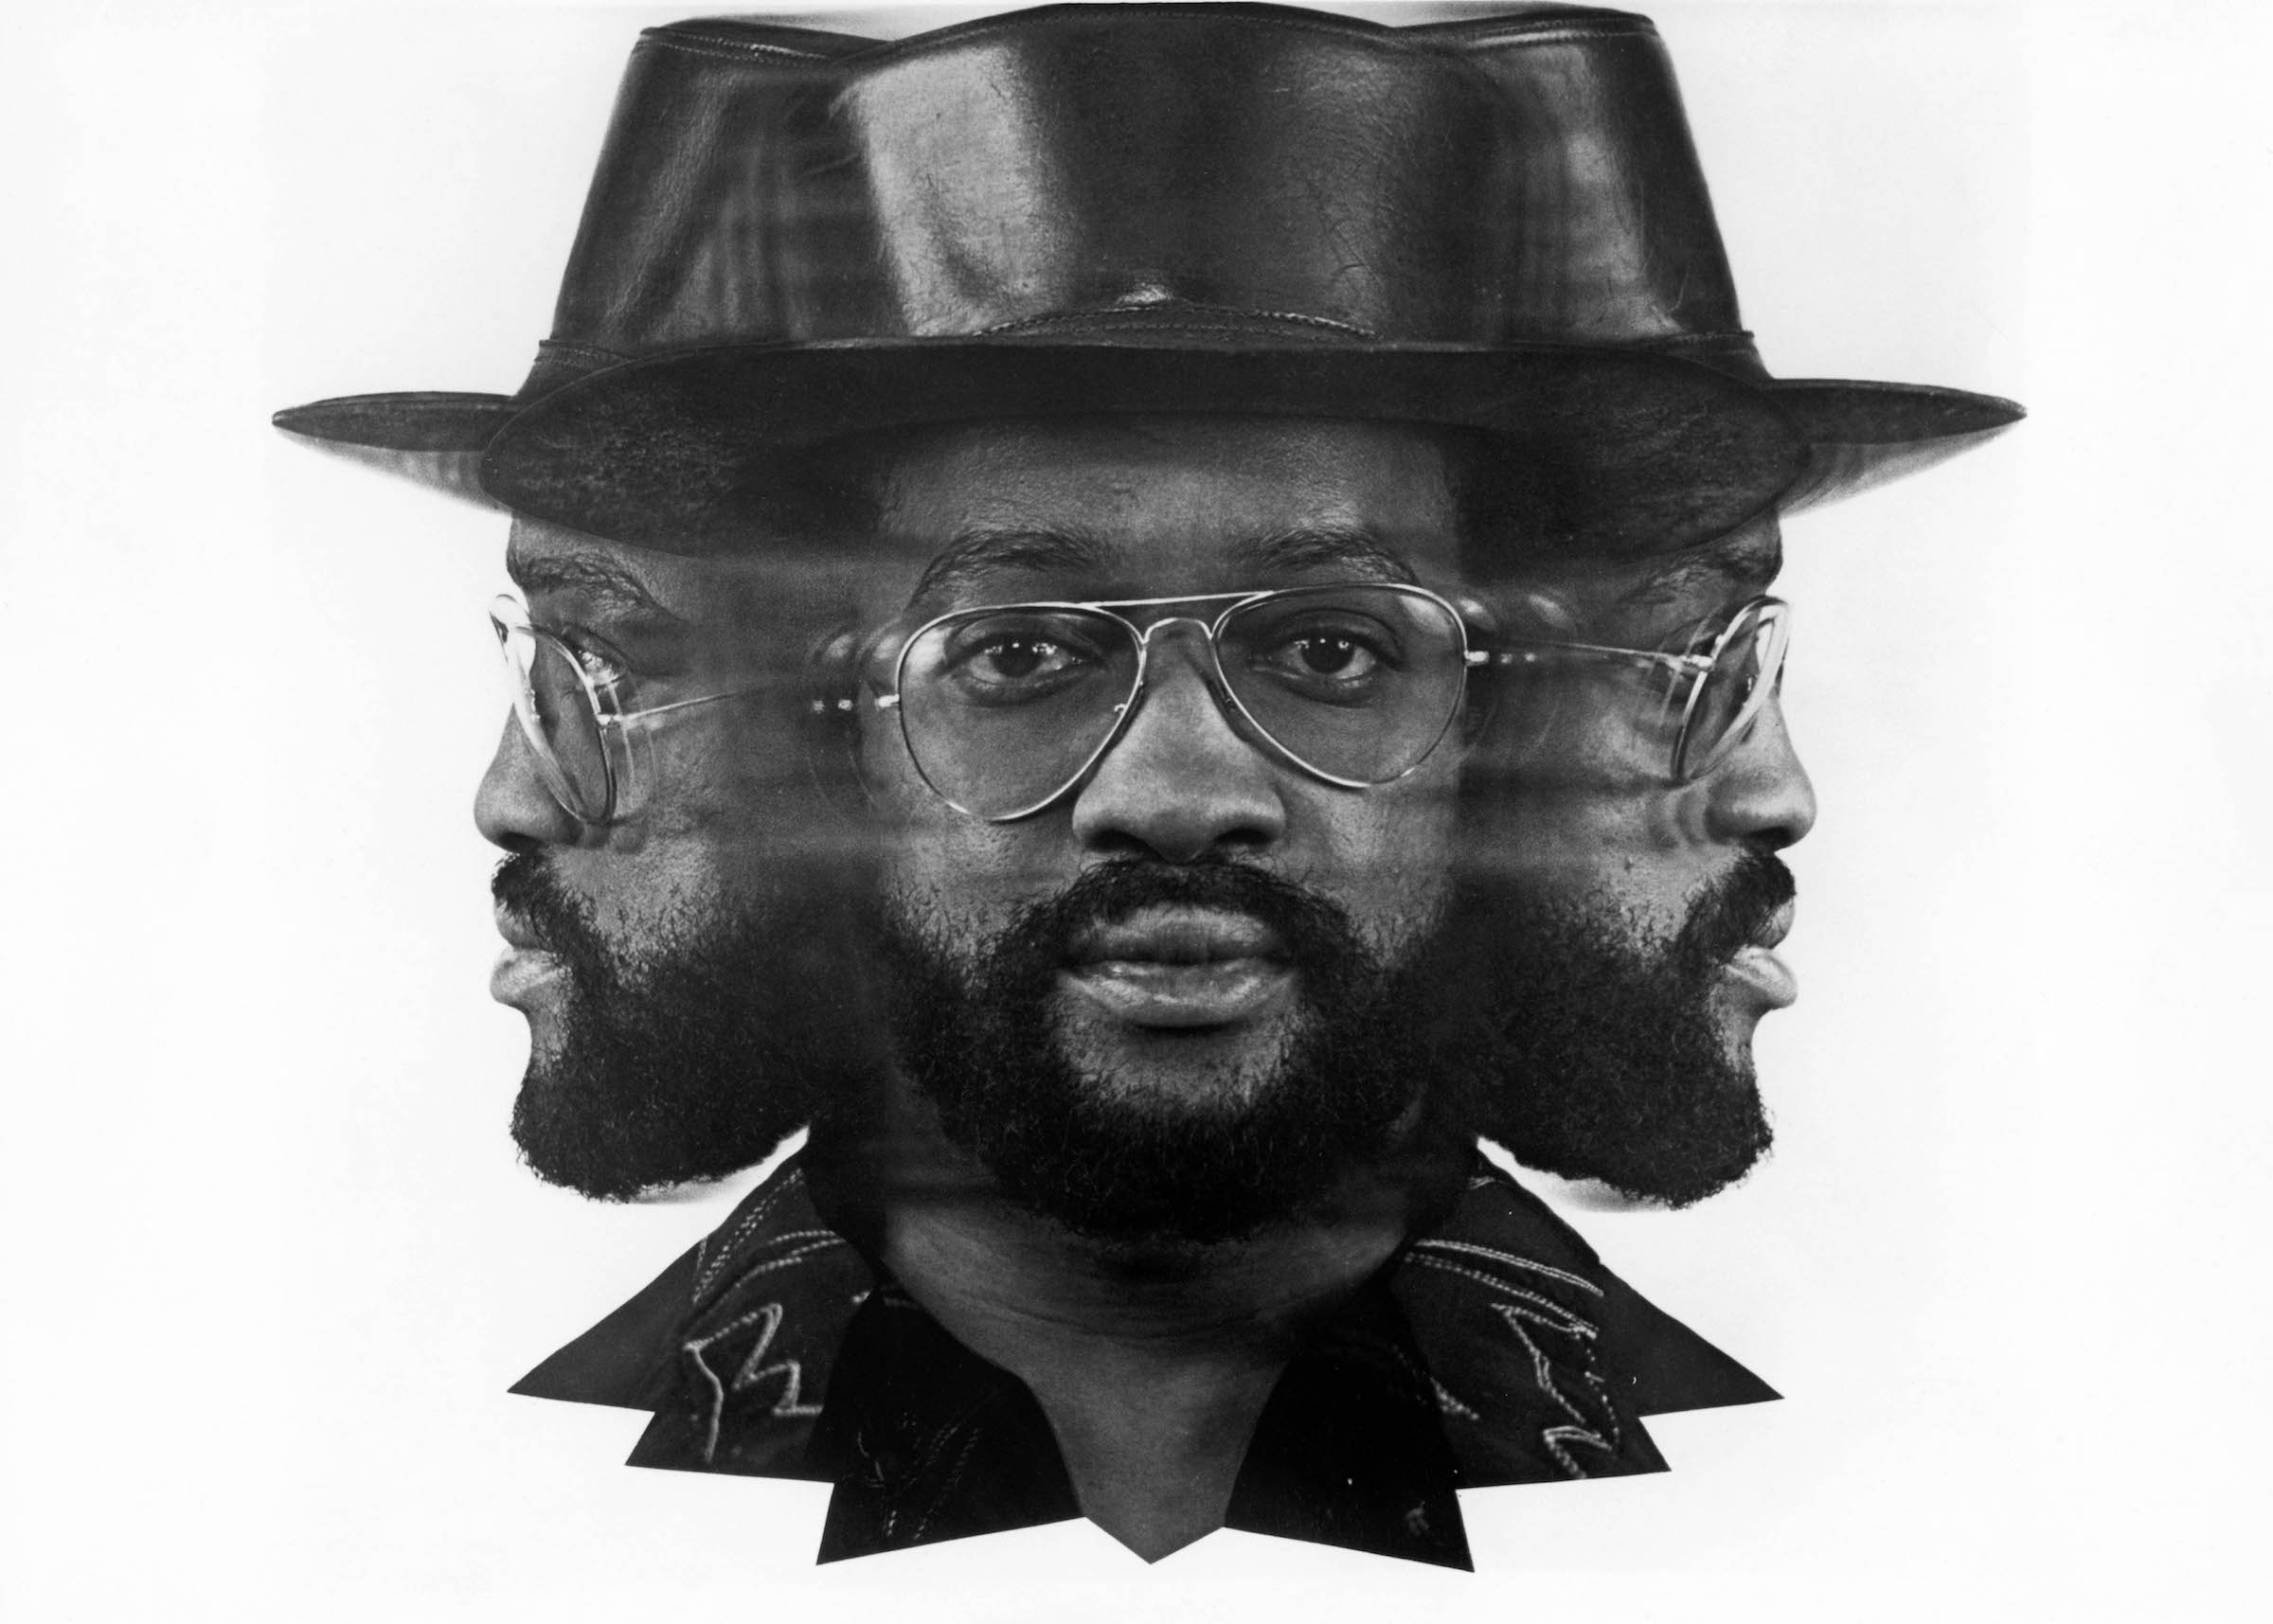 Paul first. Billy Paul - first class (1979). Billy Paul - me and Mrs. Jones.mp3. Bill Withers watching you watching me. Live in Europe Билли пол.